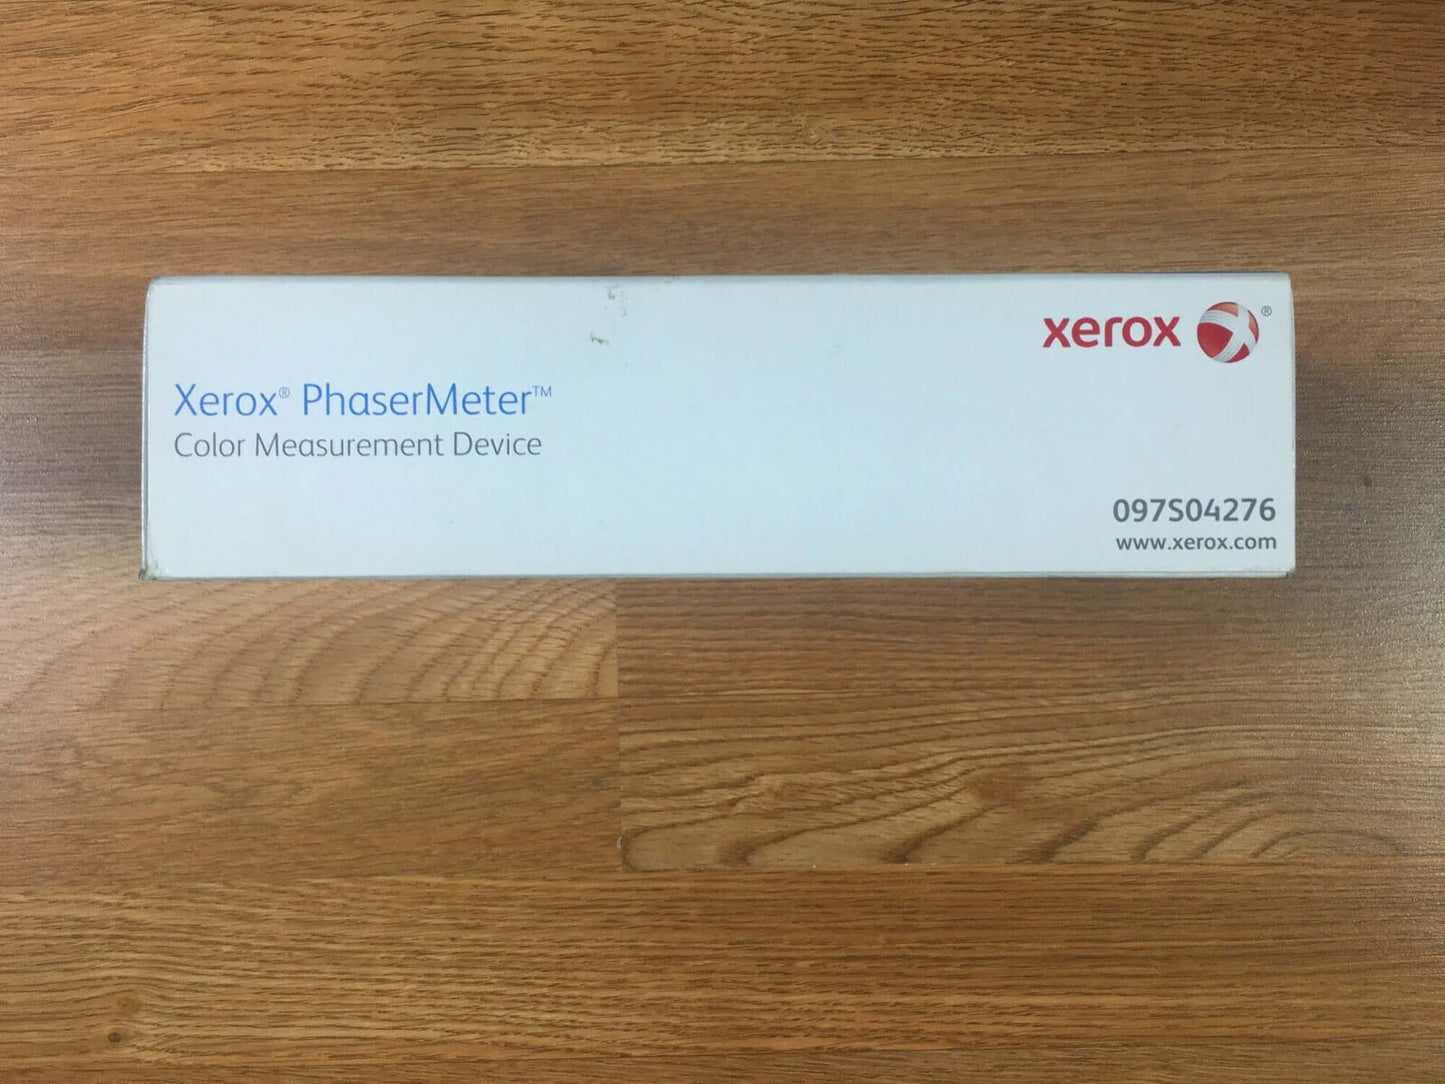 OPEN BOX Xerox PhaserMeter Color Measurement Device 097S04276 FedEx 2Day Air!! - copier-clearance-center